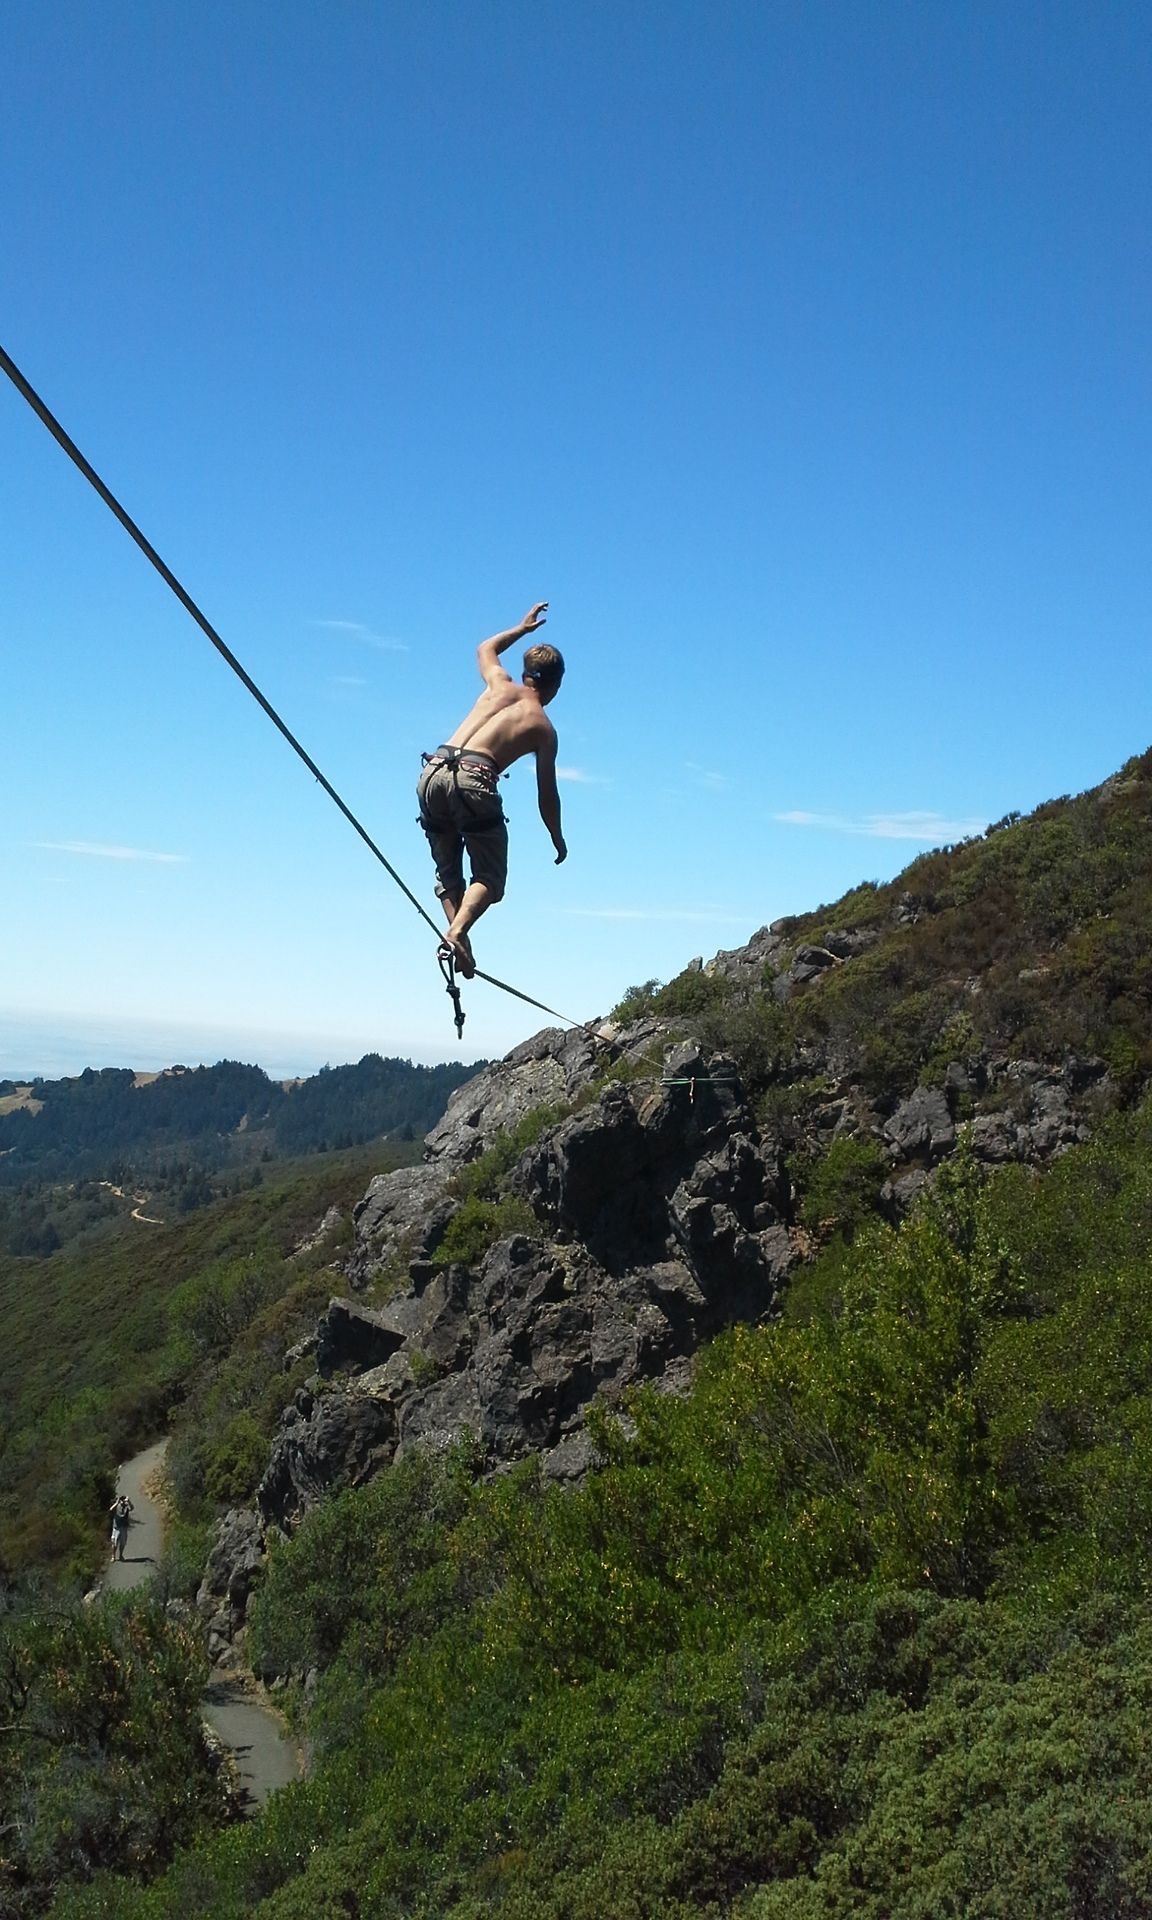 Slacklining: Taking a walk above the mountain, Focusing on your abilities, Balance training. 1160x1920 HD Background.